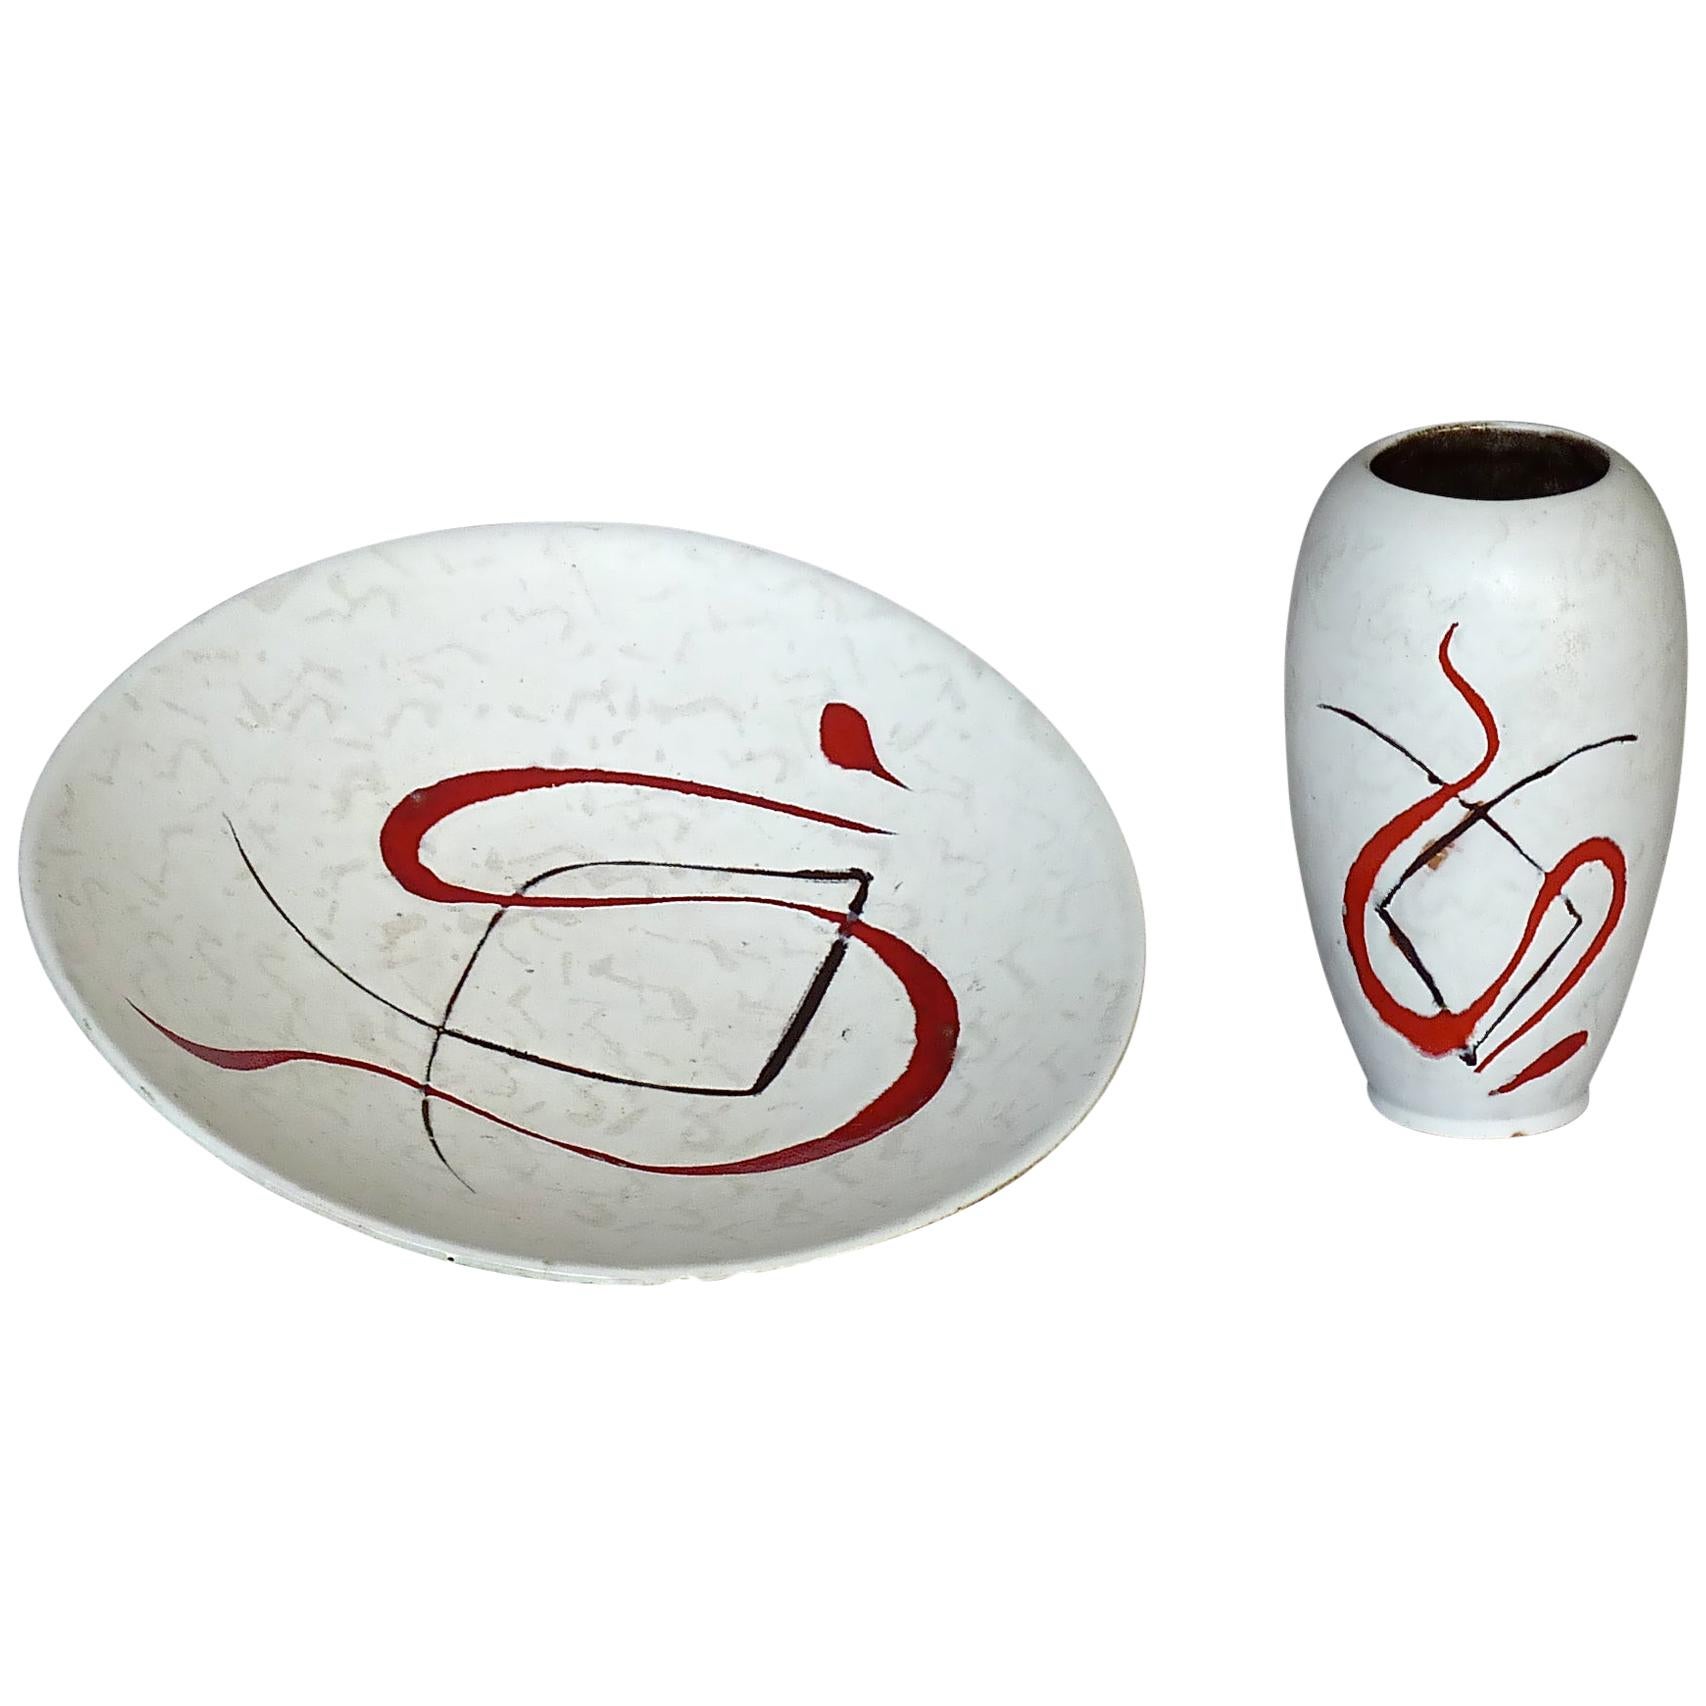 Abstract Midcentury Art Ceramic Vase and Bowl Gambone Miro Style White Red 1950s For Sale